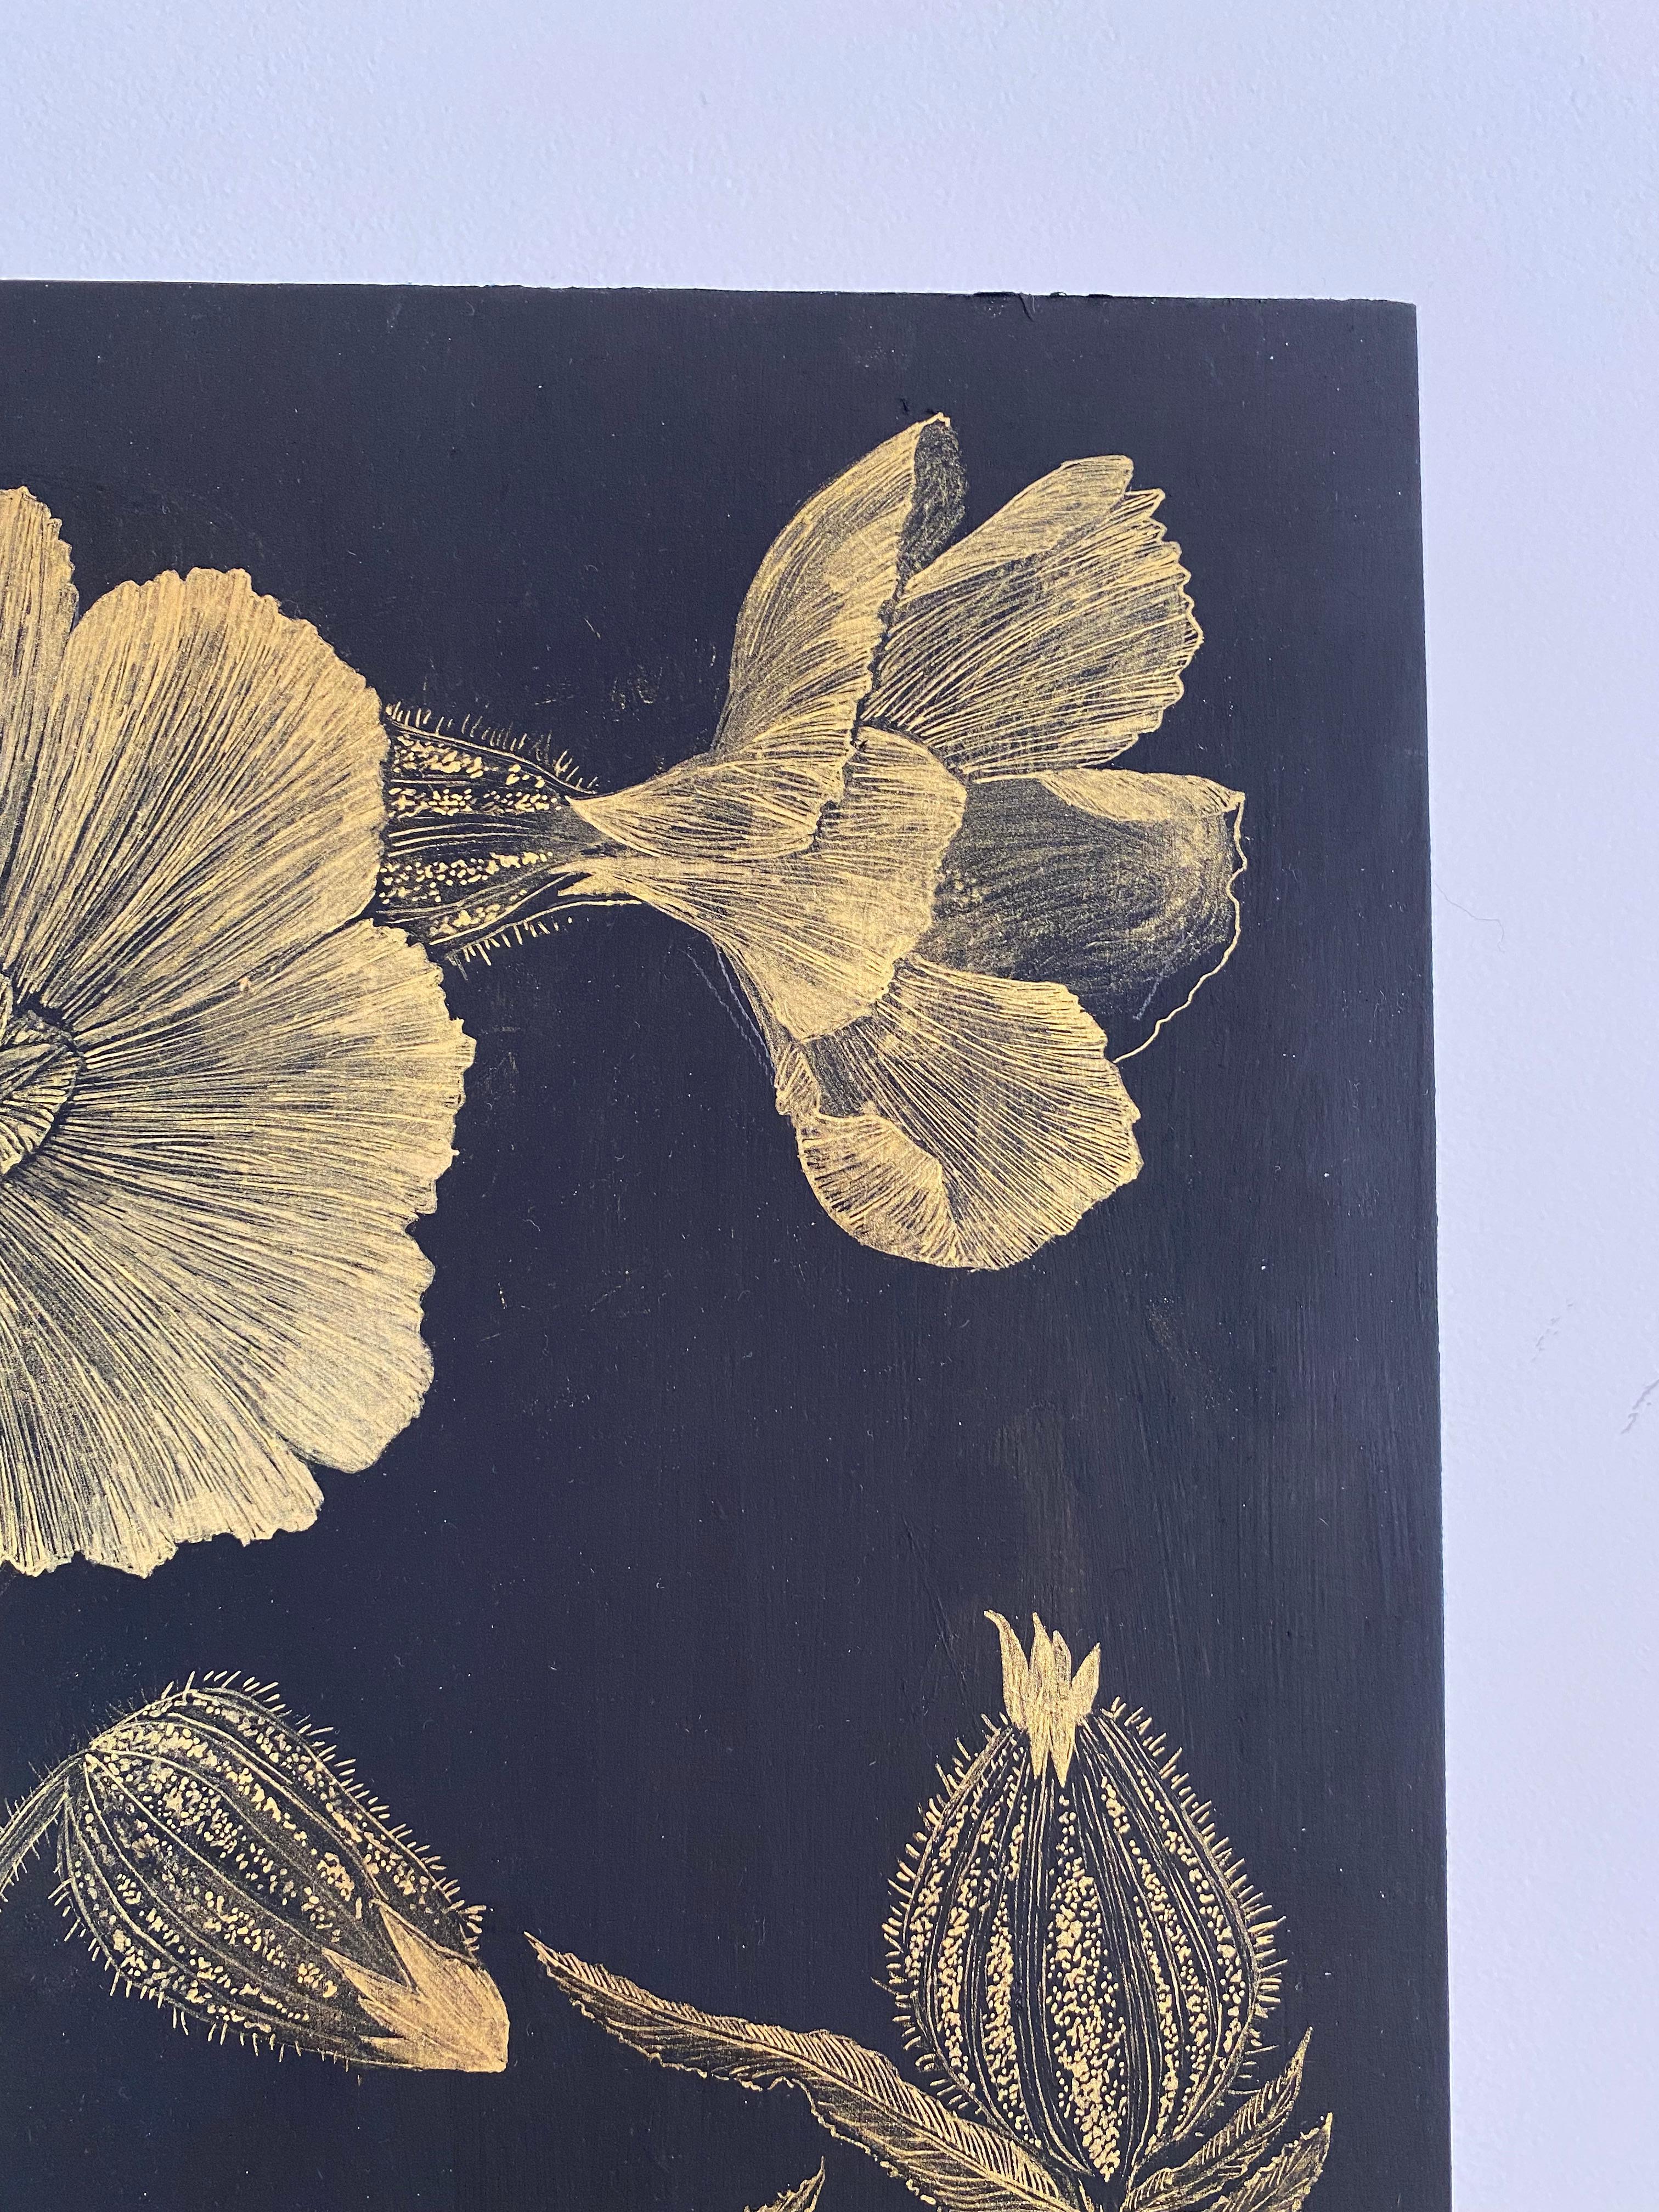 Marshmallow Two, Gold Flowers, Leaves Stem, Metallic Botanical Painting on Black For Sale 5